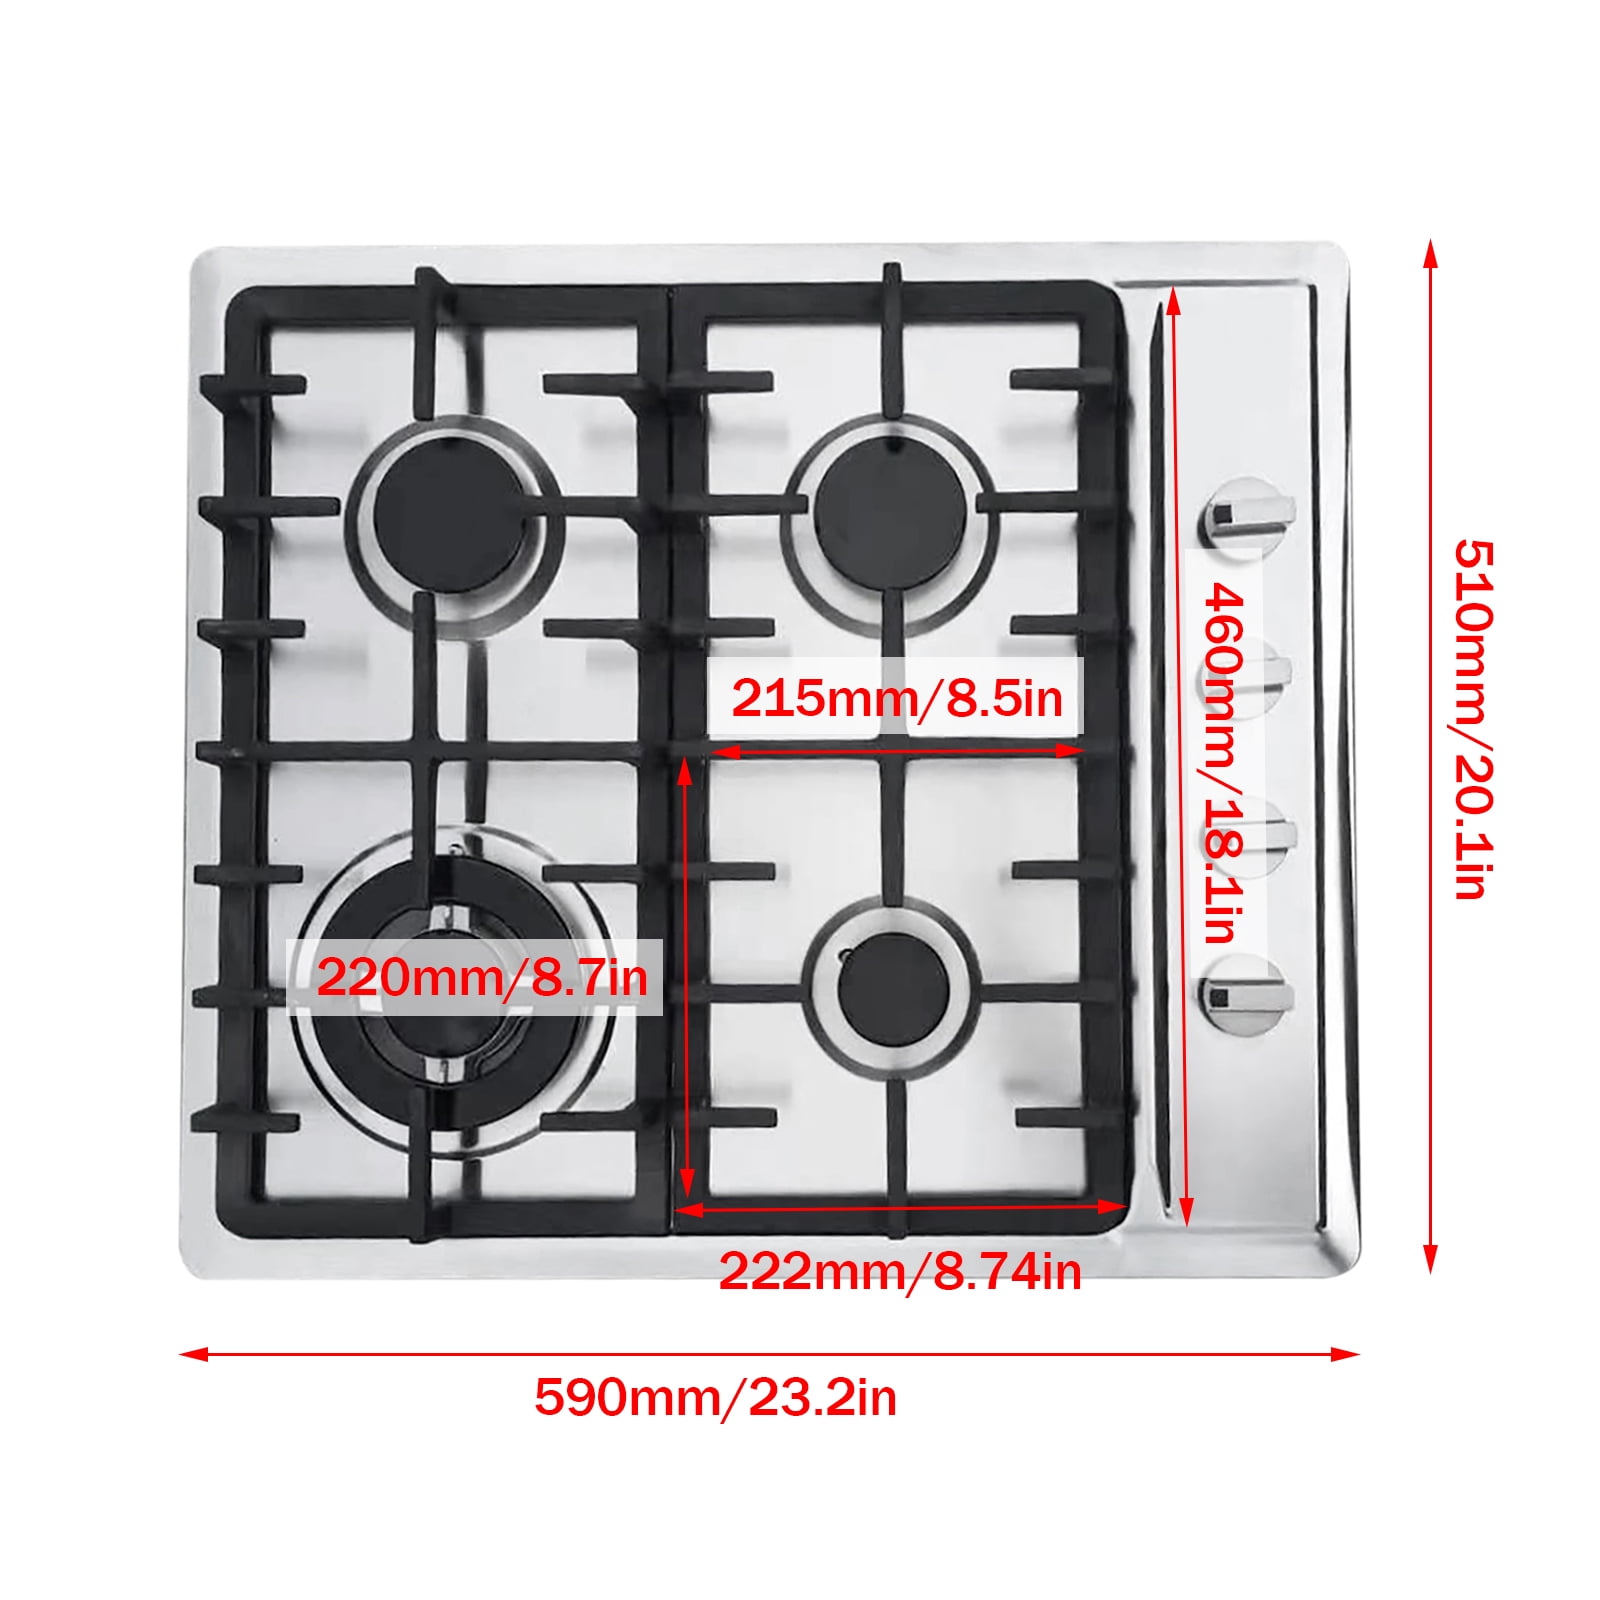 Details about   23" Stainless Steel Built-in 4 Sealed Burners Stove High Powere Gas Cooktop 